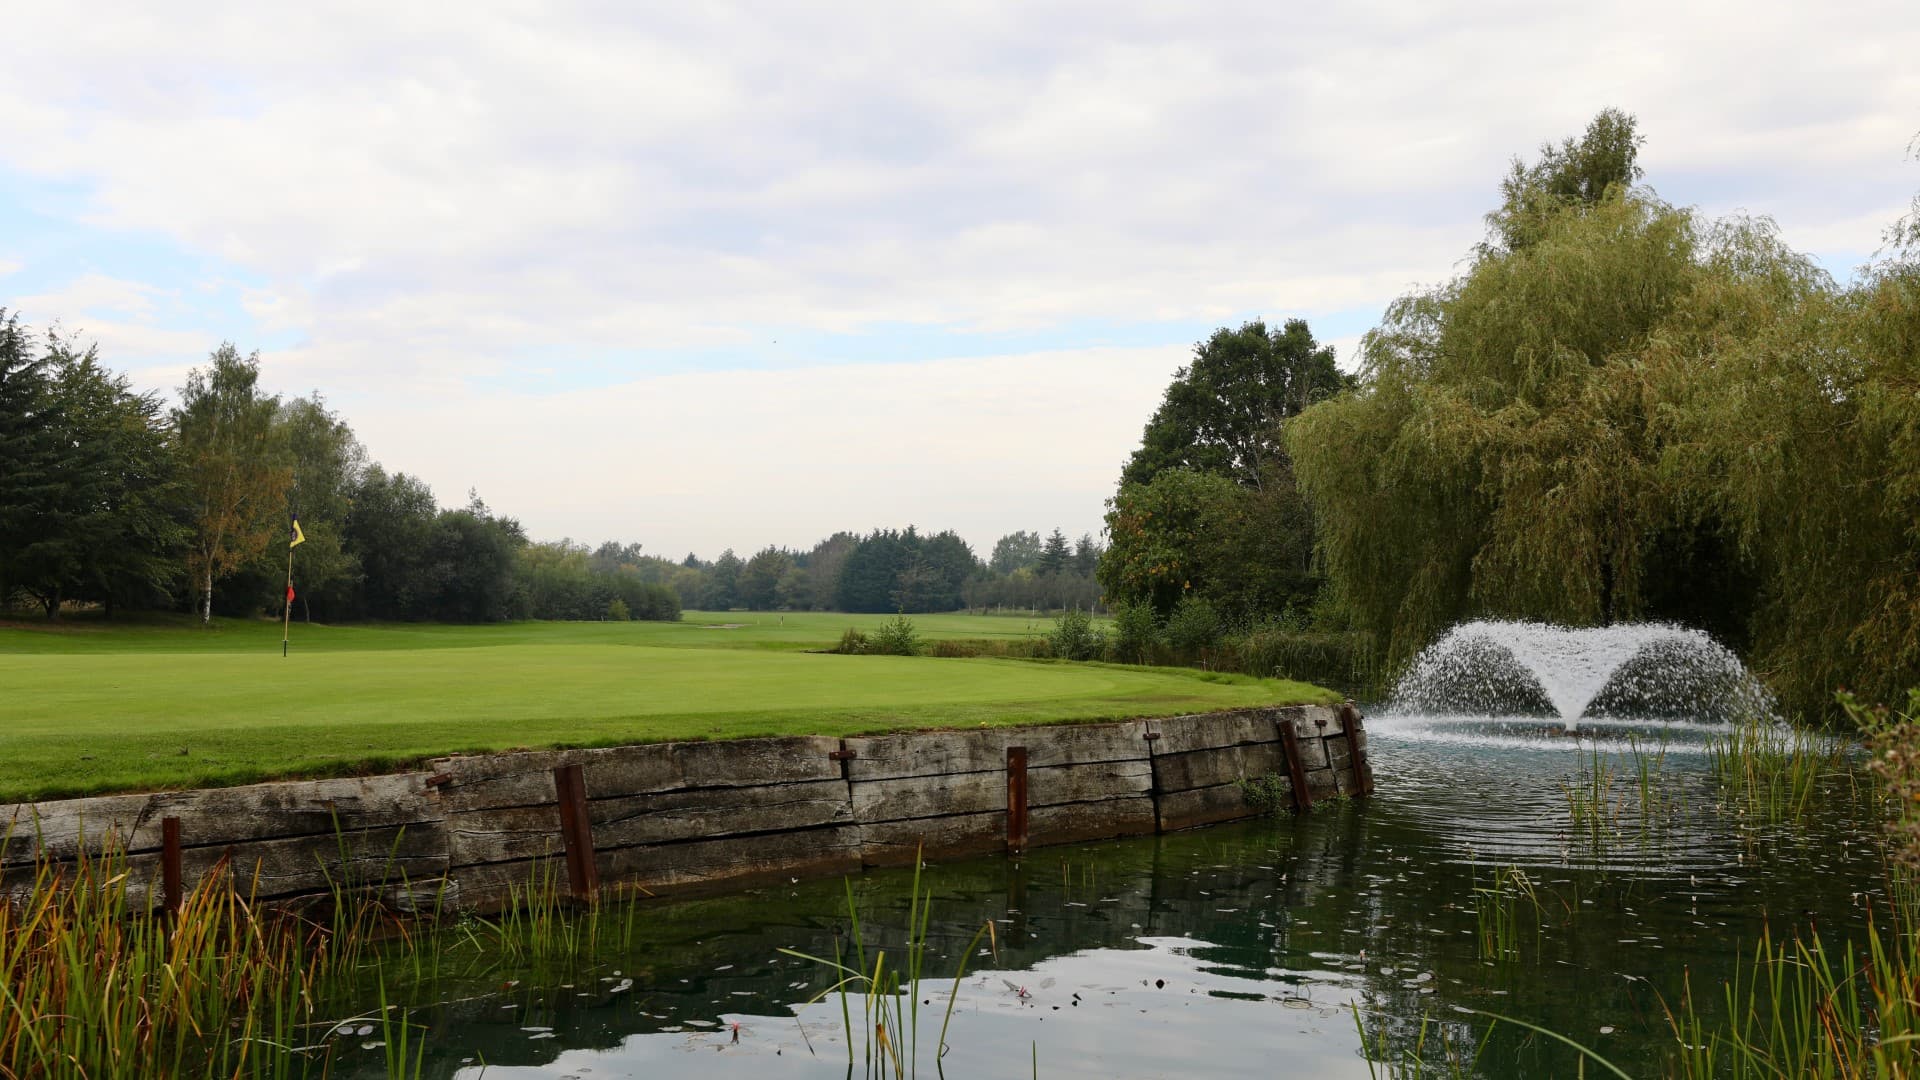 View of The Essex golf course and water feature